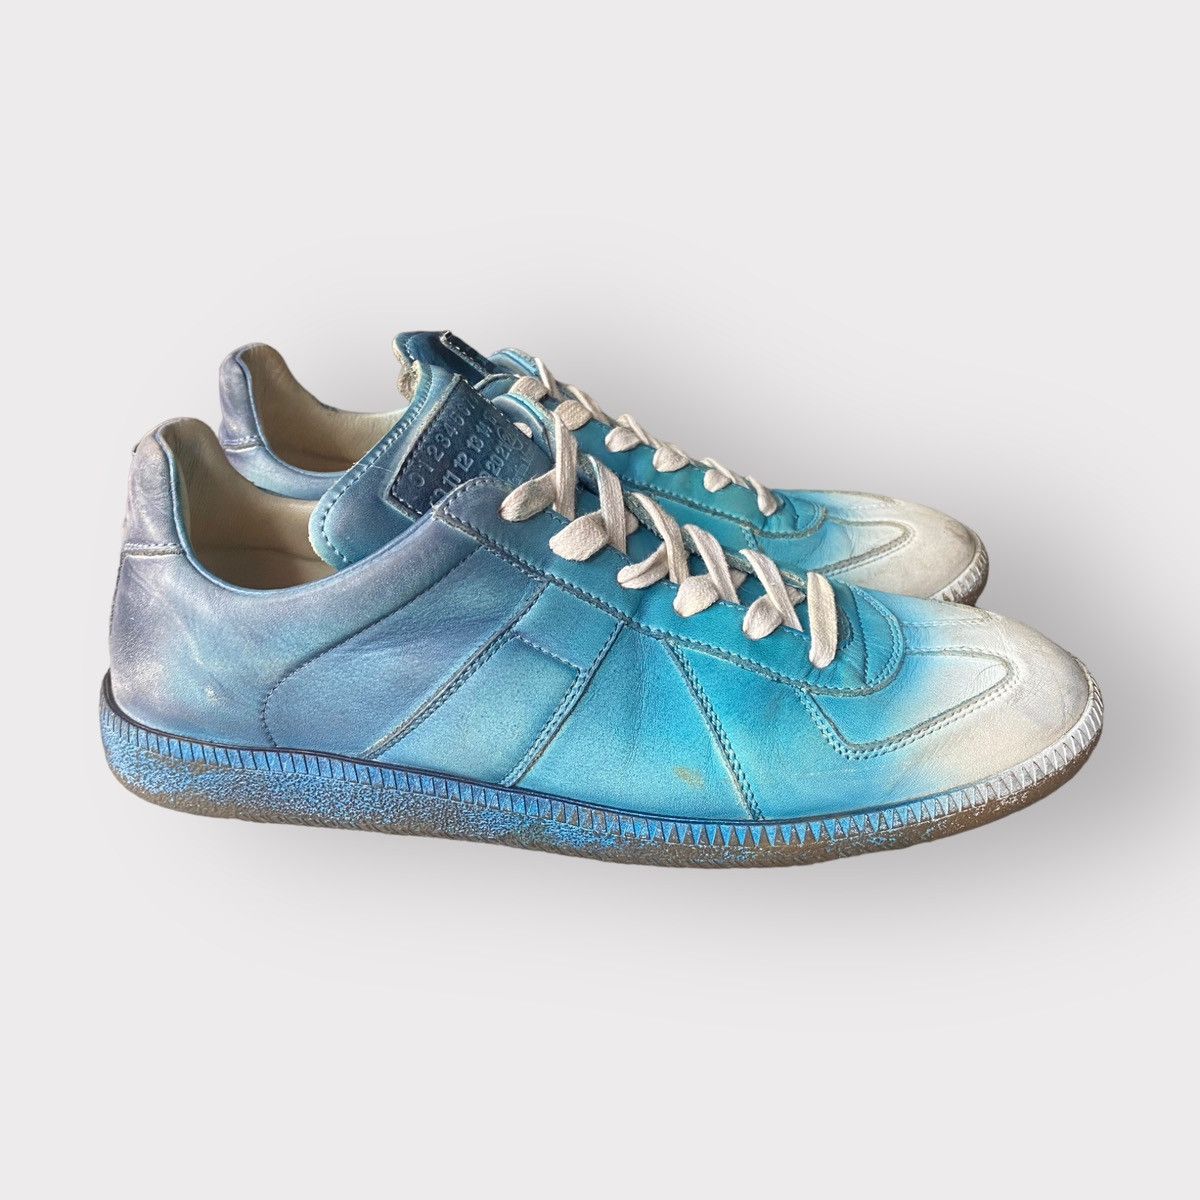 Pre-owned Maison Margiela 2014 Blue Airbrush Replica G.a.t Shoes